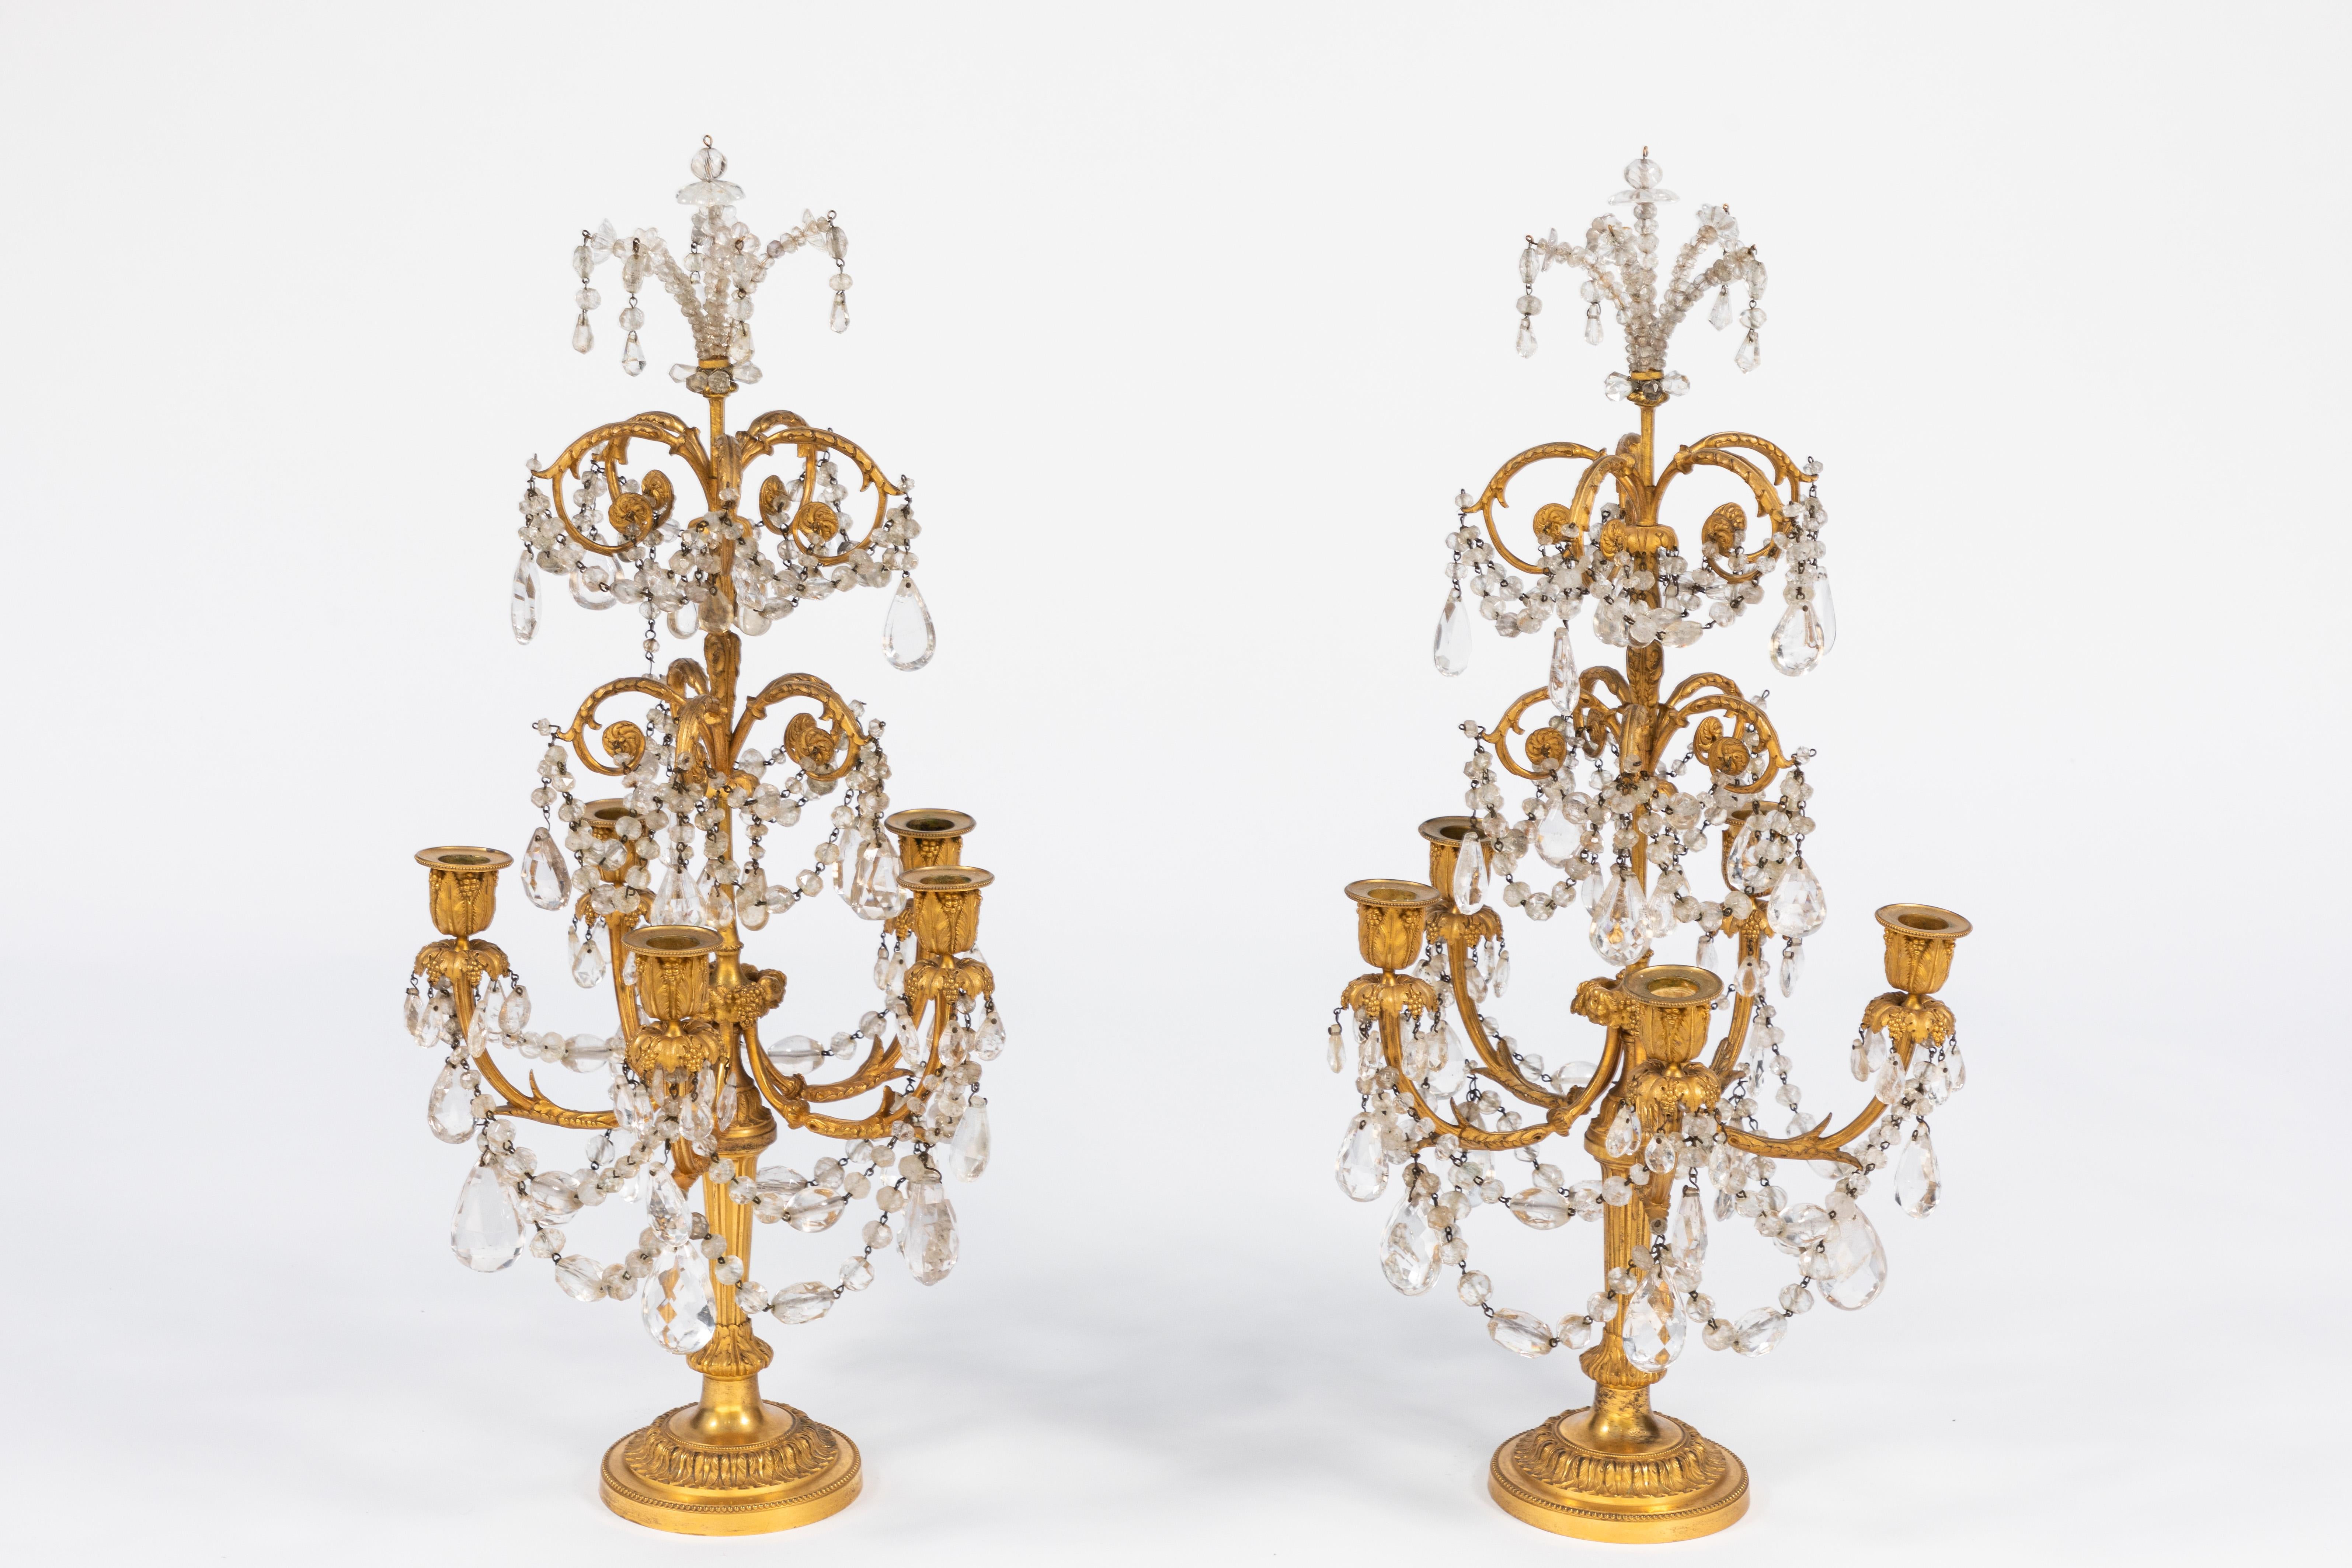 Pair of 19th Century French Doré Bronze and Rock Crystal Girandoles For Sale 7